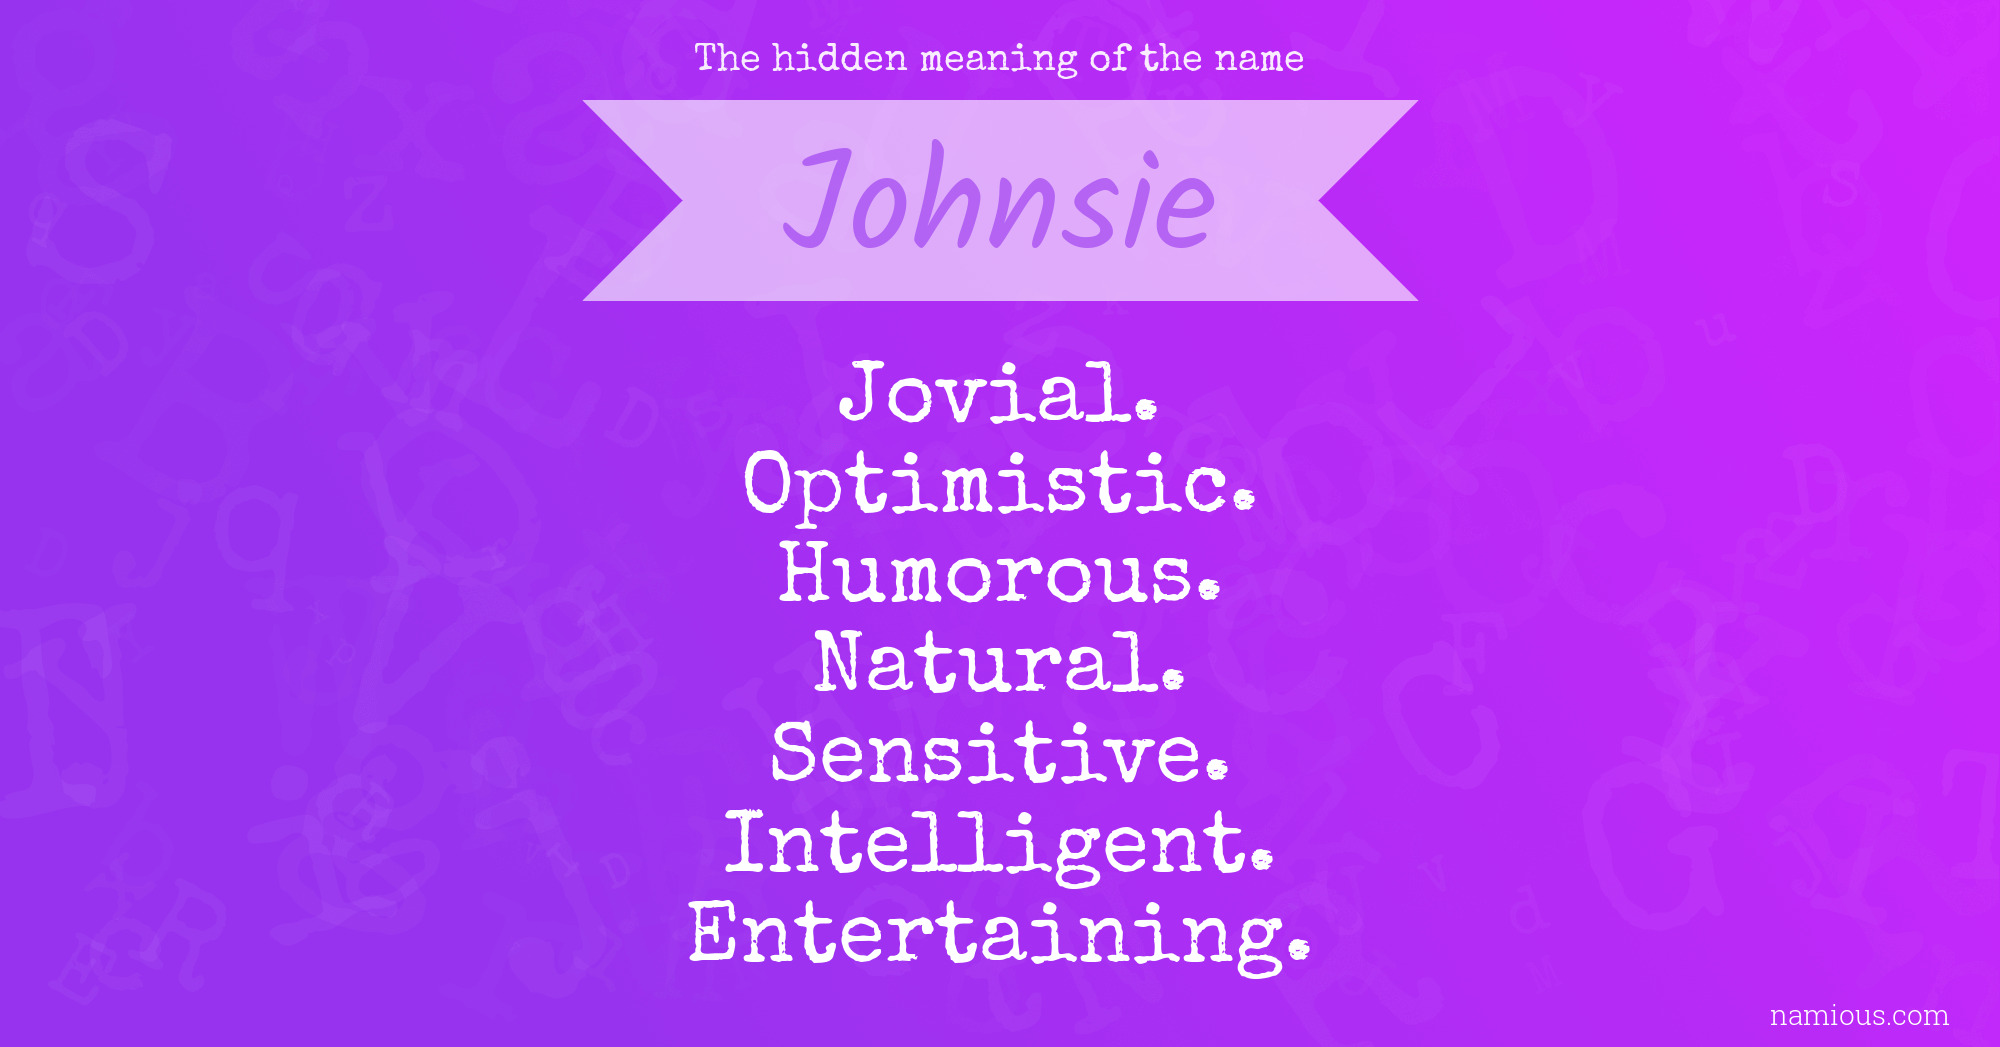 The hidden meaning of the name Johnsie